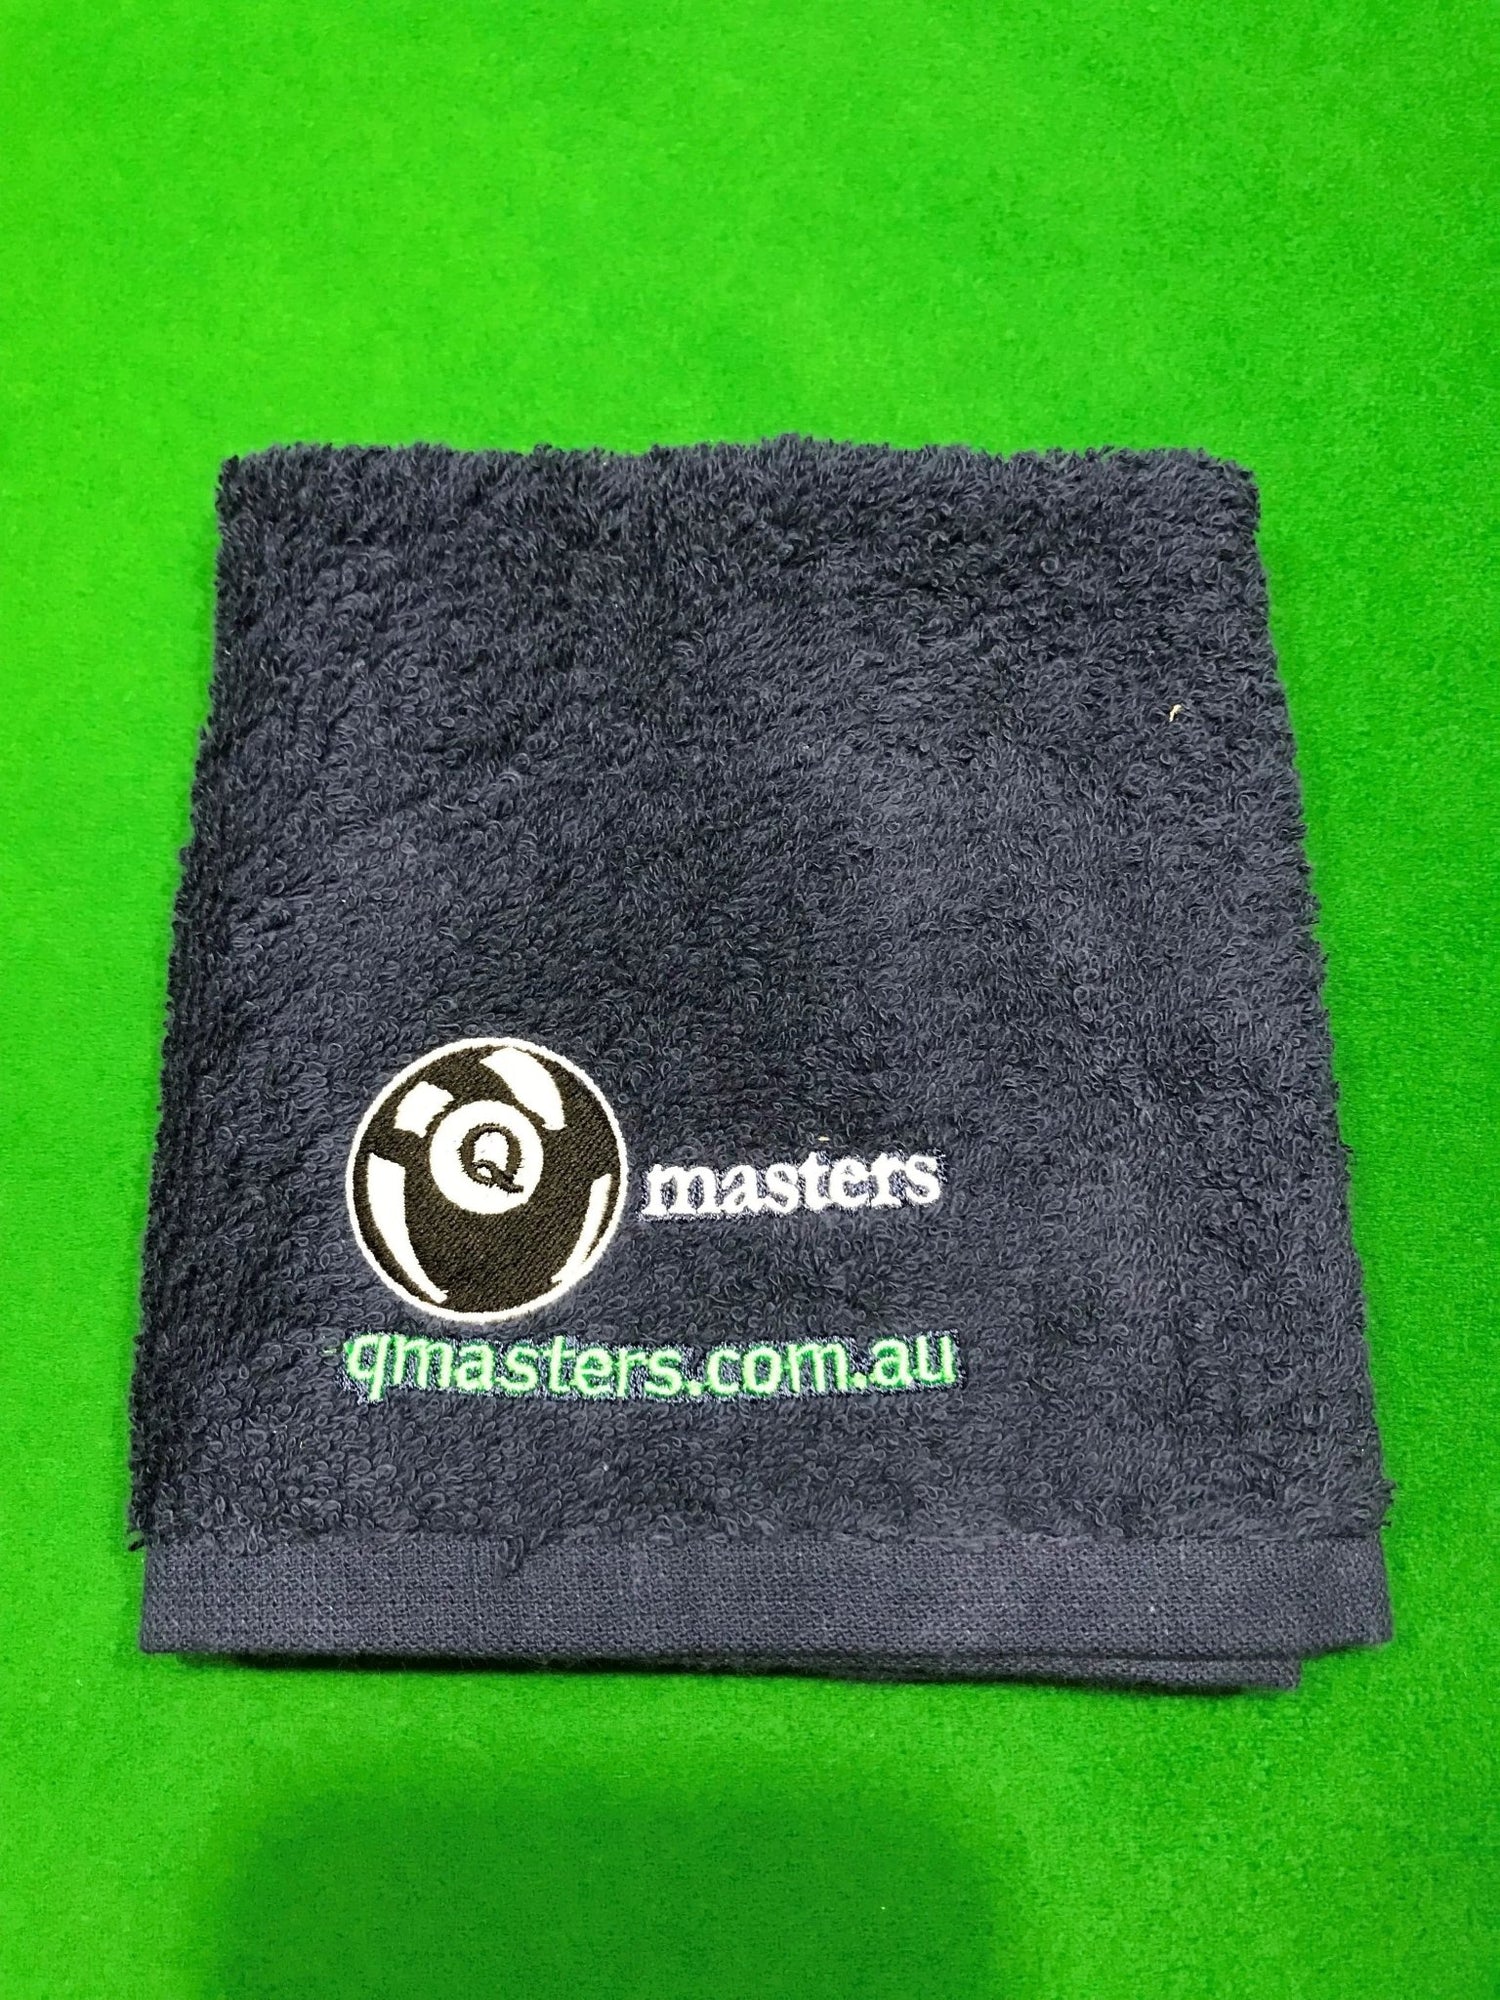 Q-Masters Embroidered Cue Sport Towel Blue - Q-Masters